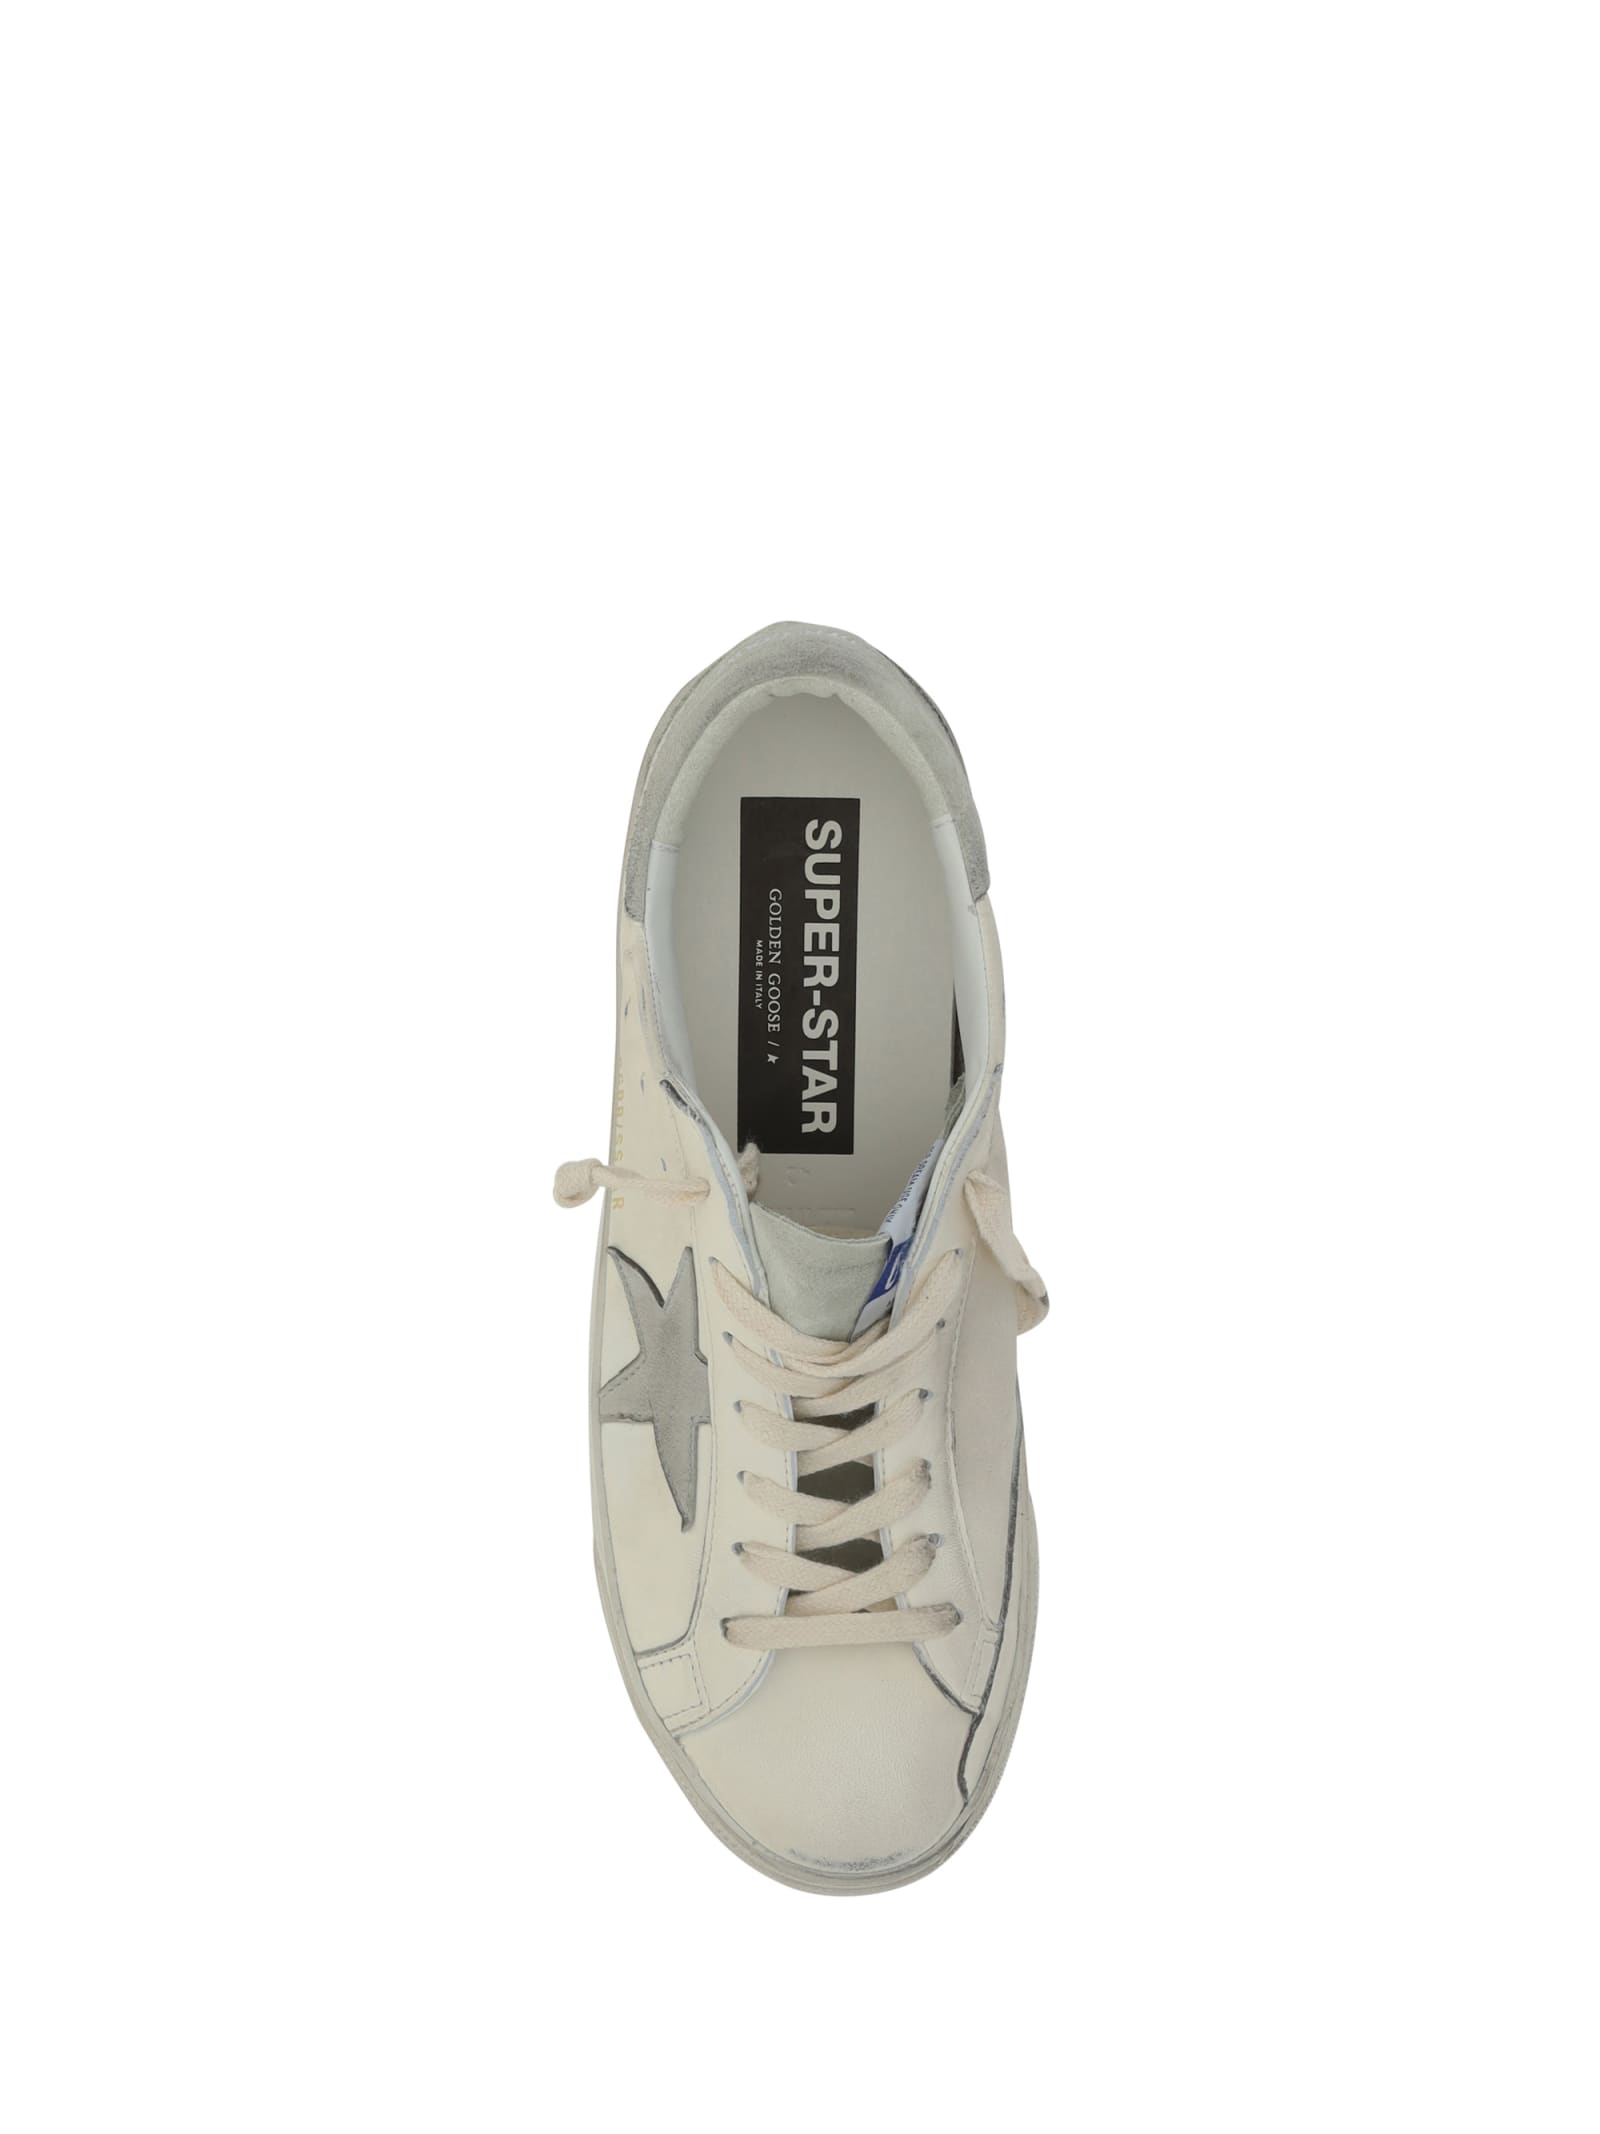 Shop Golden Goose Super Star Sneakers In White/ice/grey